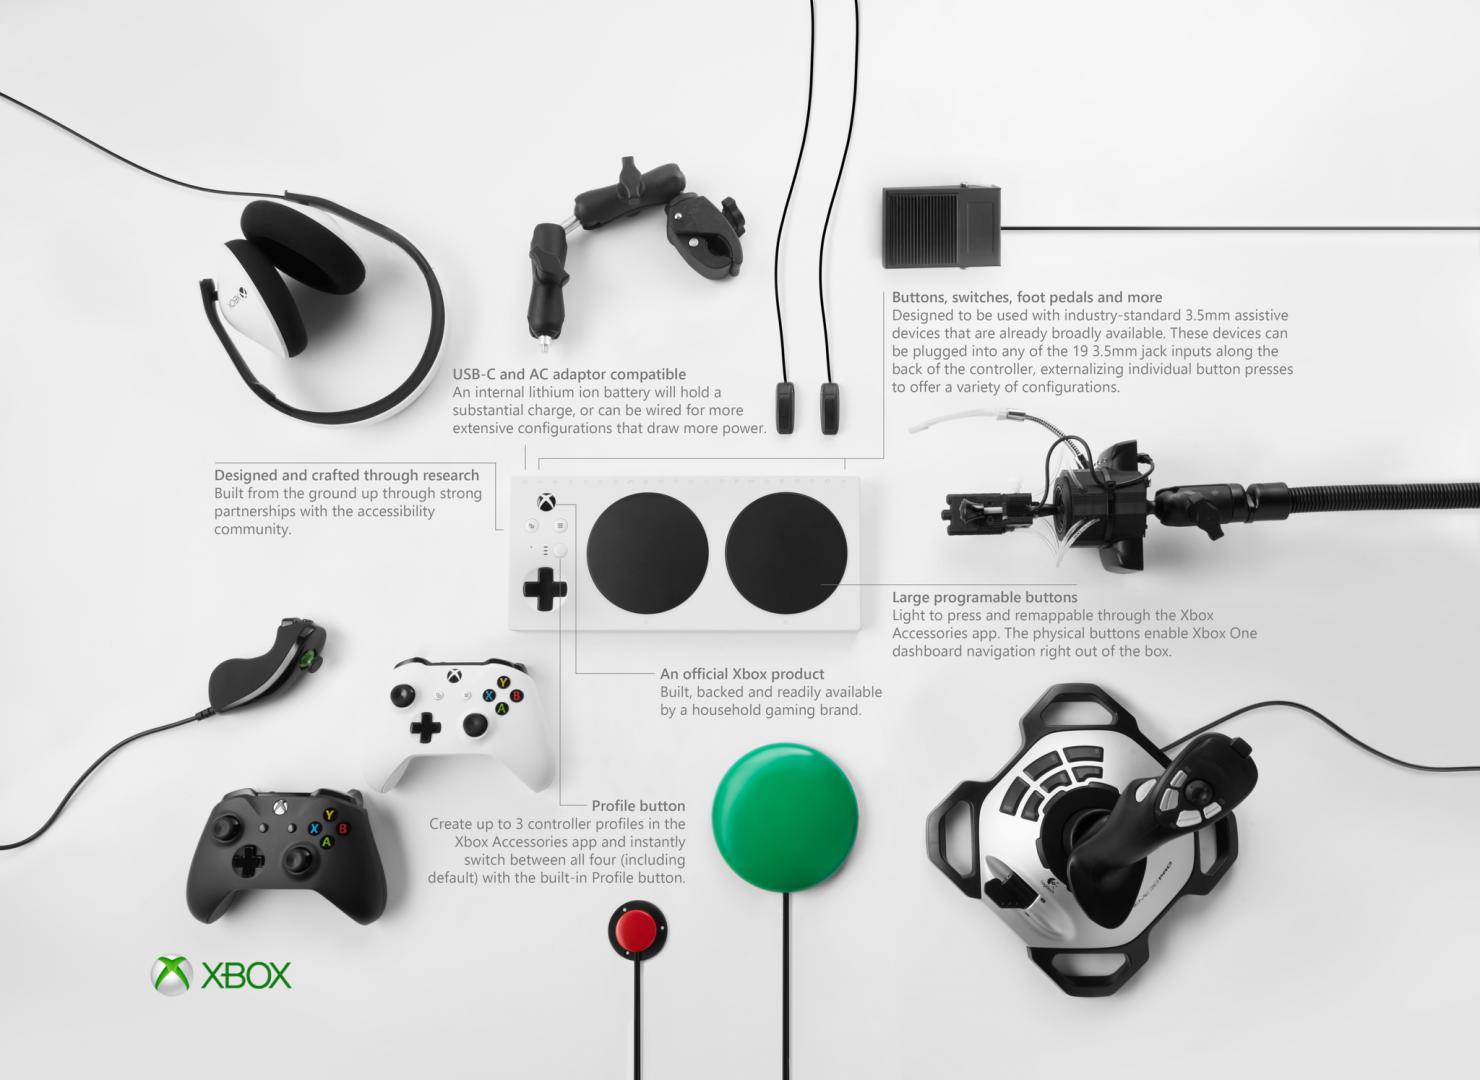 Xbox Adaptive Controller Now Available for Pre-Order, Arriving September